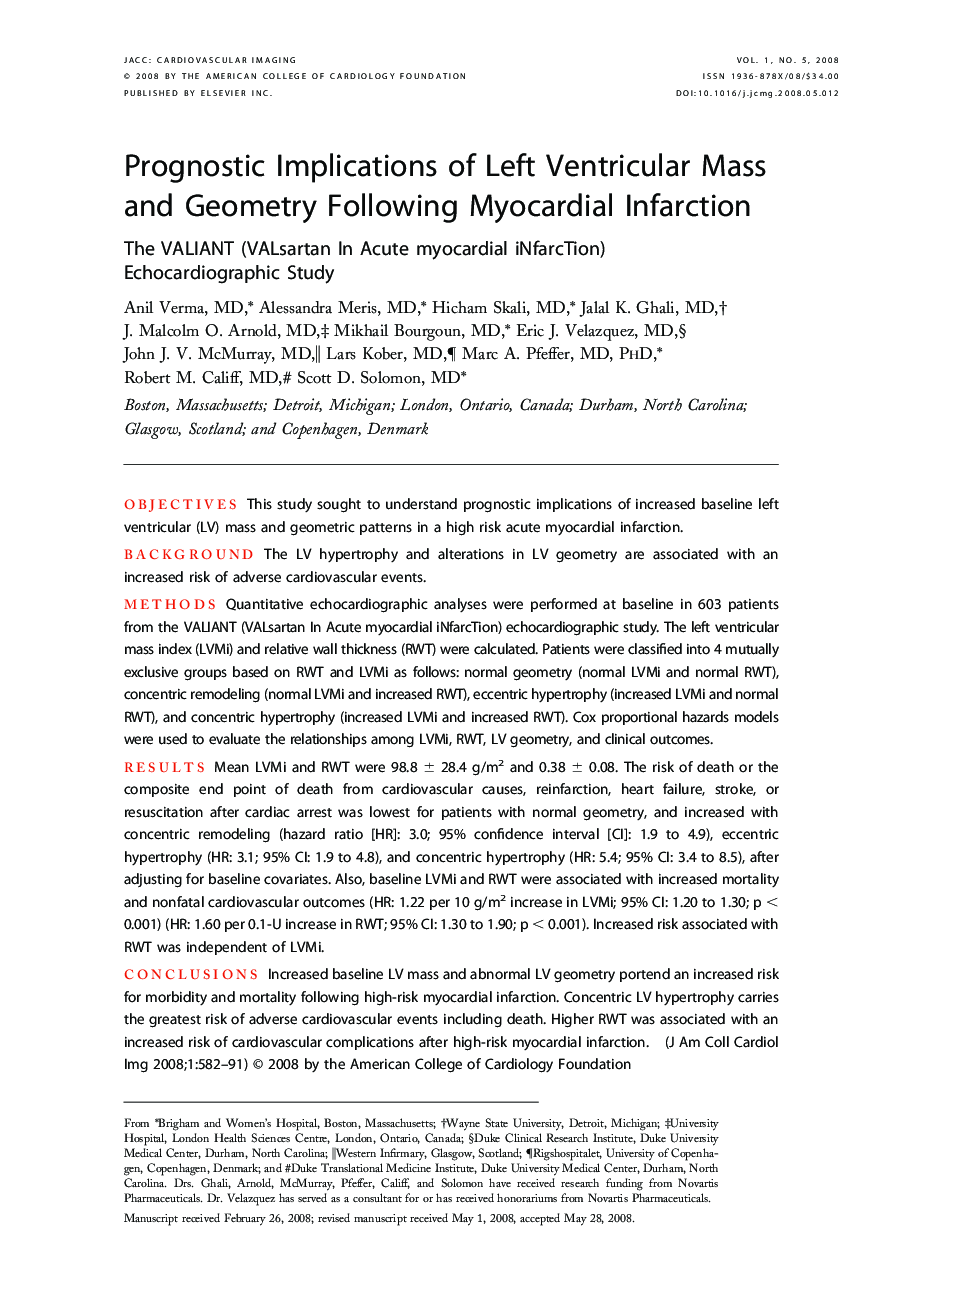 Prognostic Implications of Left Ventricular Mass and Geometry Following Myocardial Infarction : The VALIANT (VALsartan In Acute myocardial iNfarcTion) Echocardiographic Study